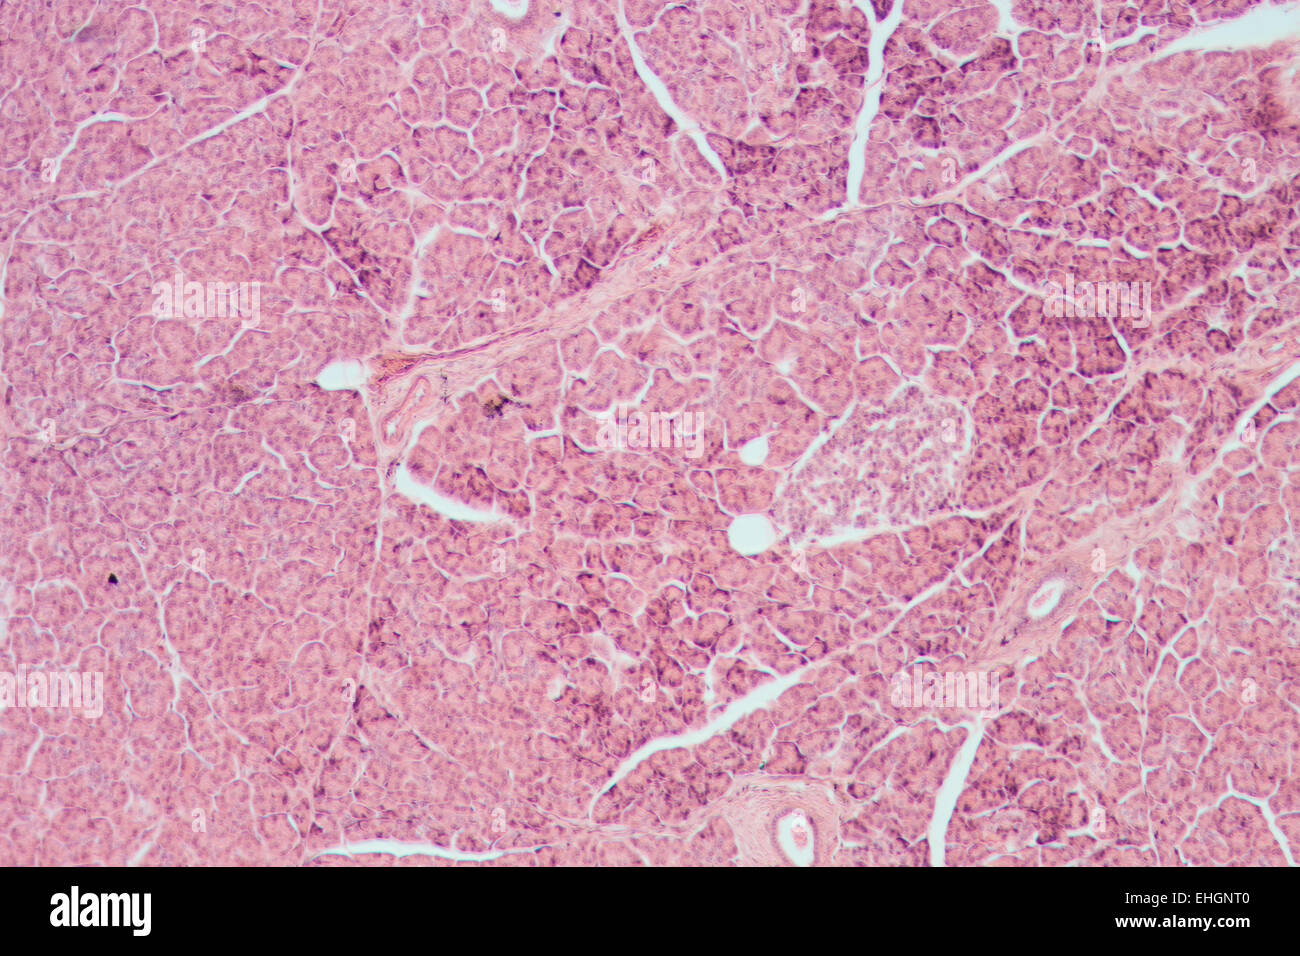 microscopic section of liver tissue Stock Photo